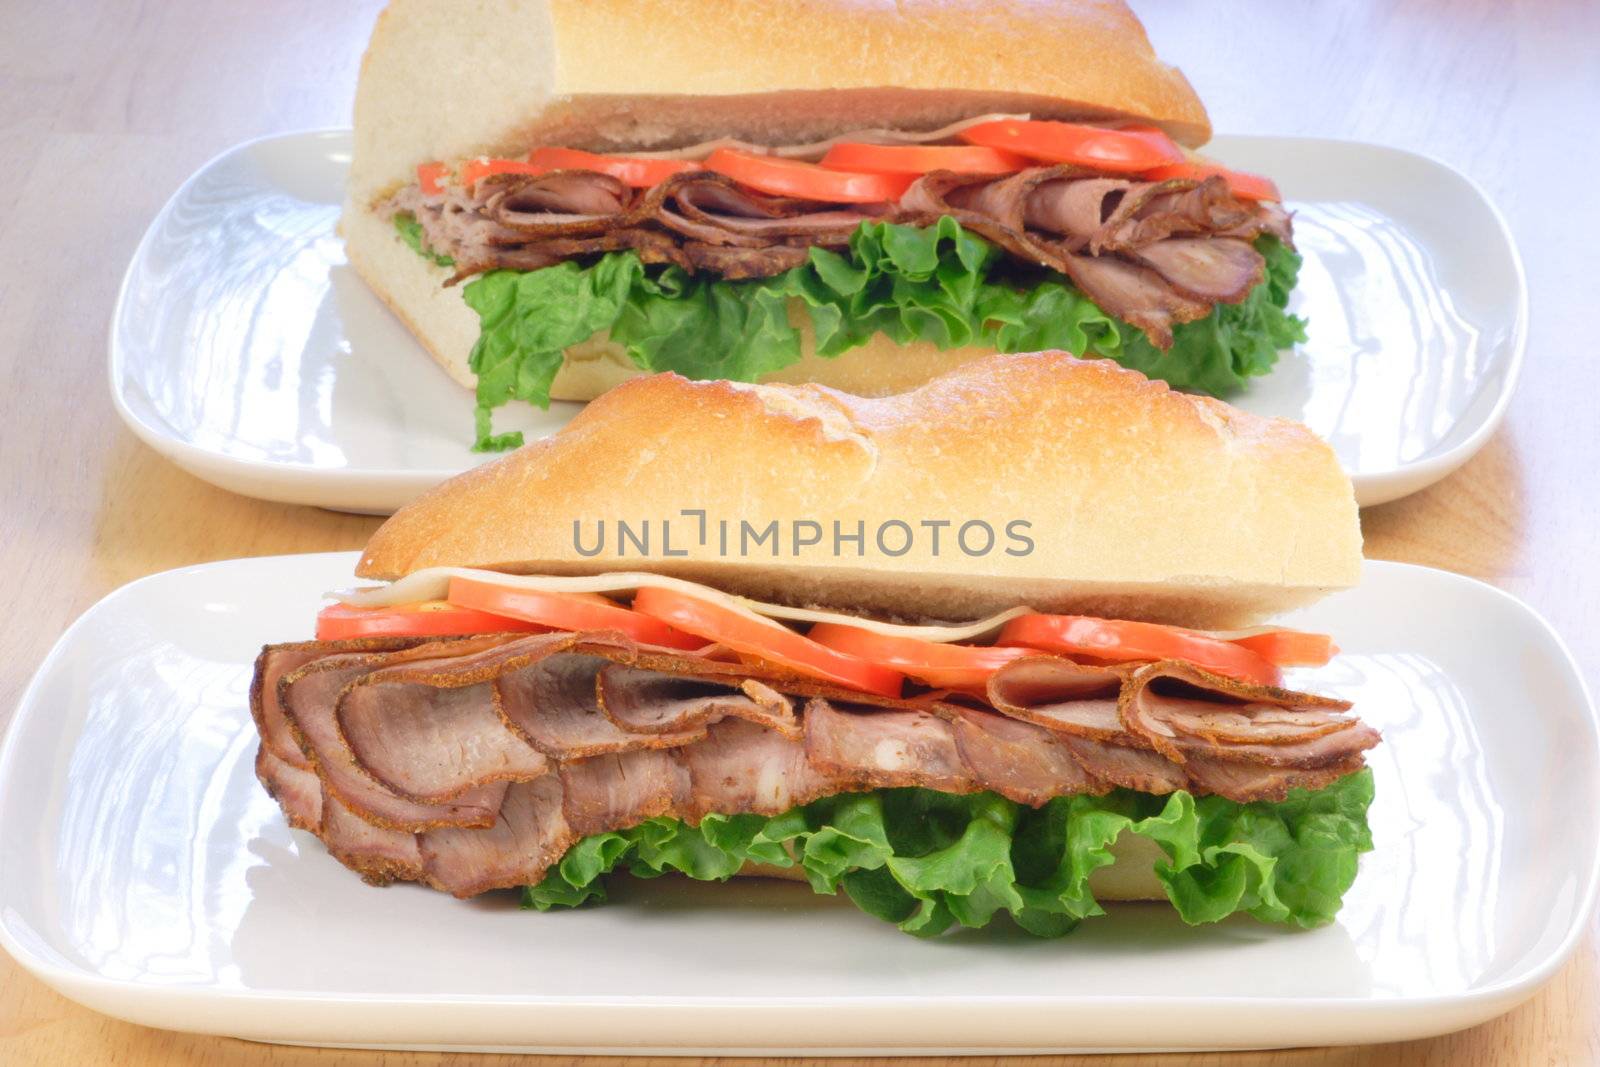 oven roasted and sliced beef sub by tacar